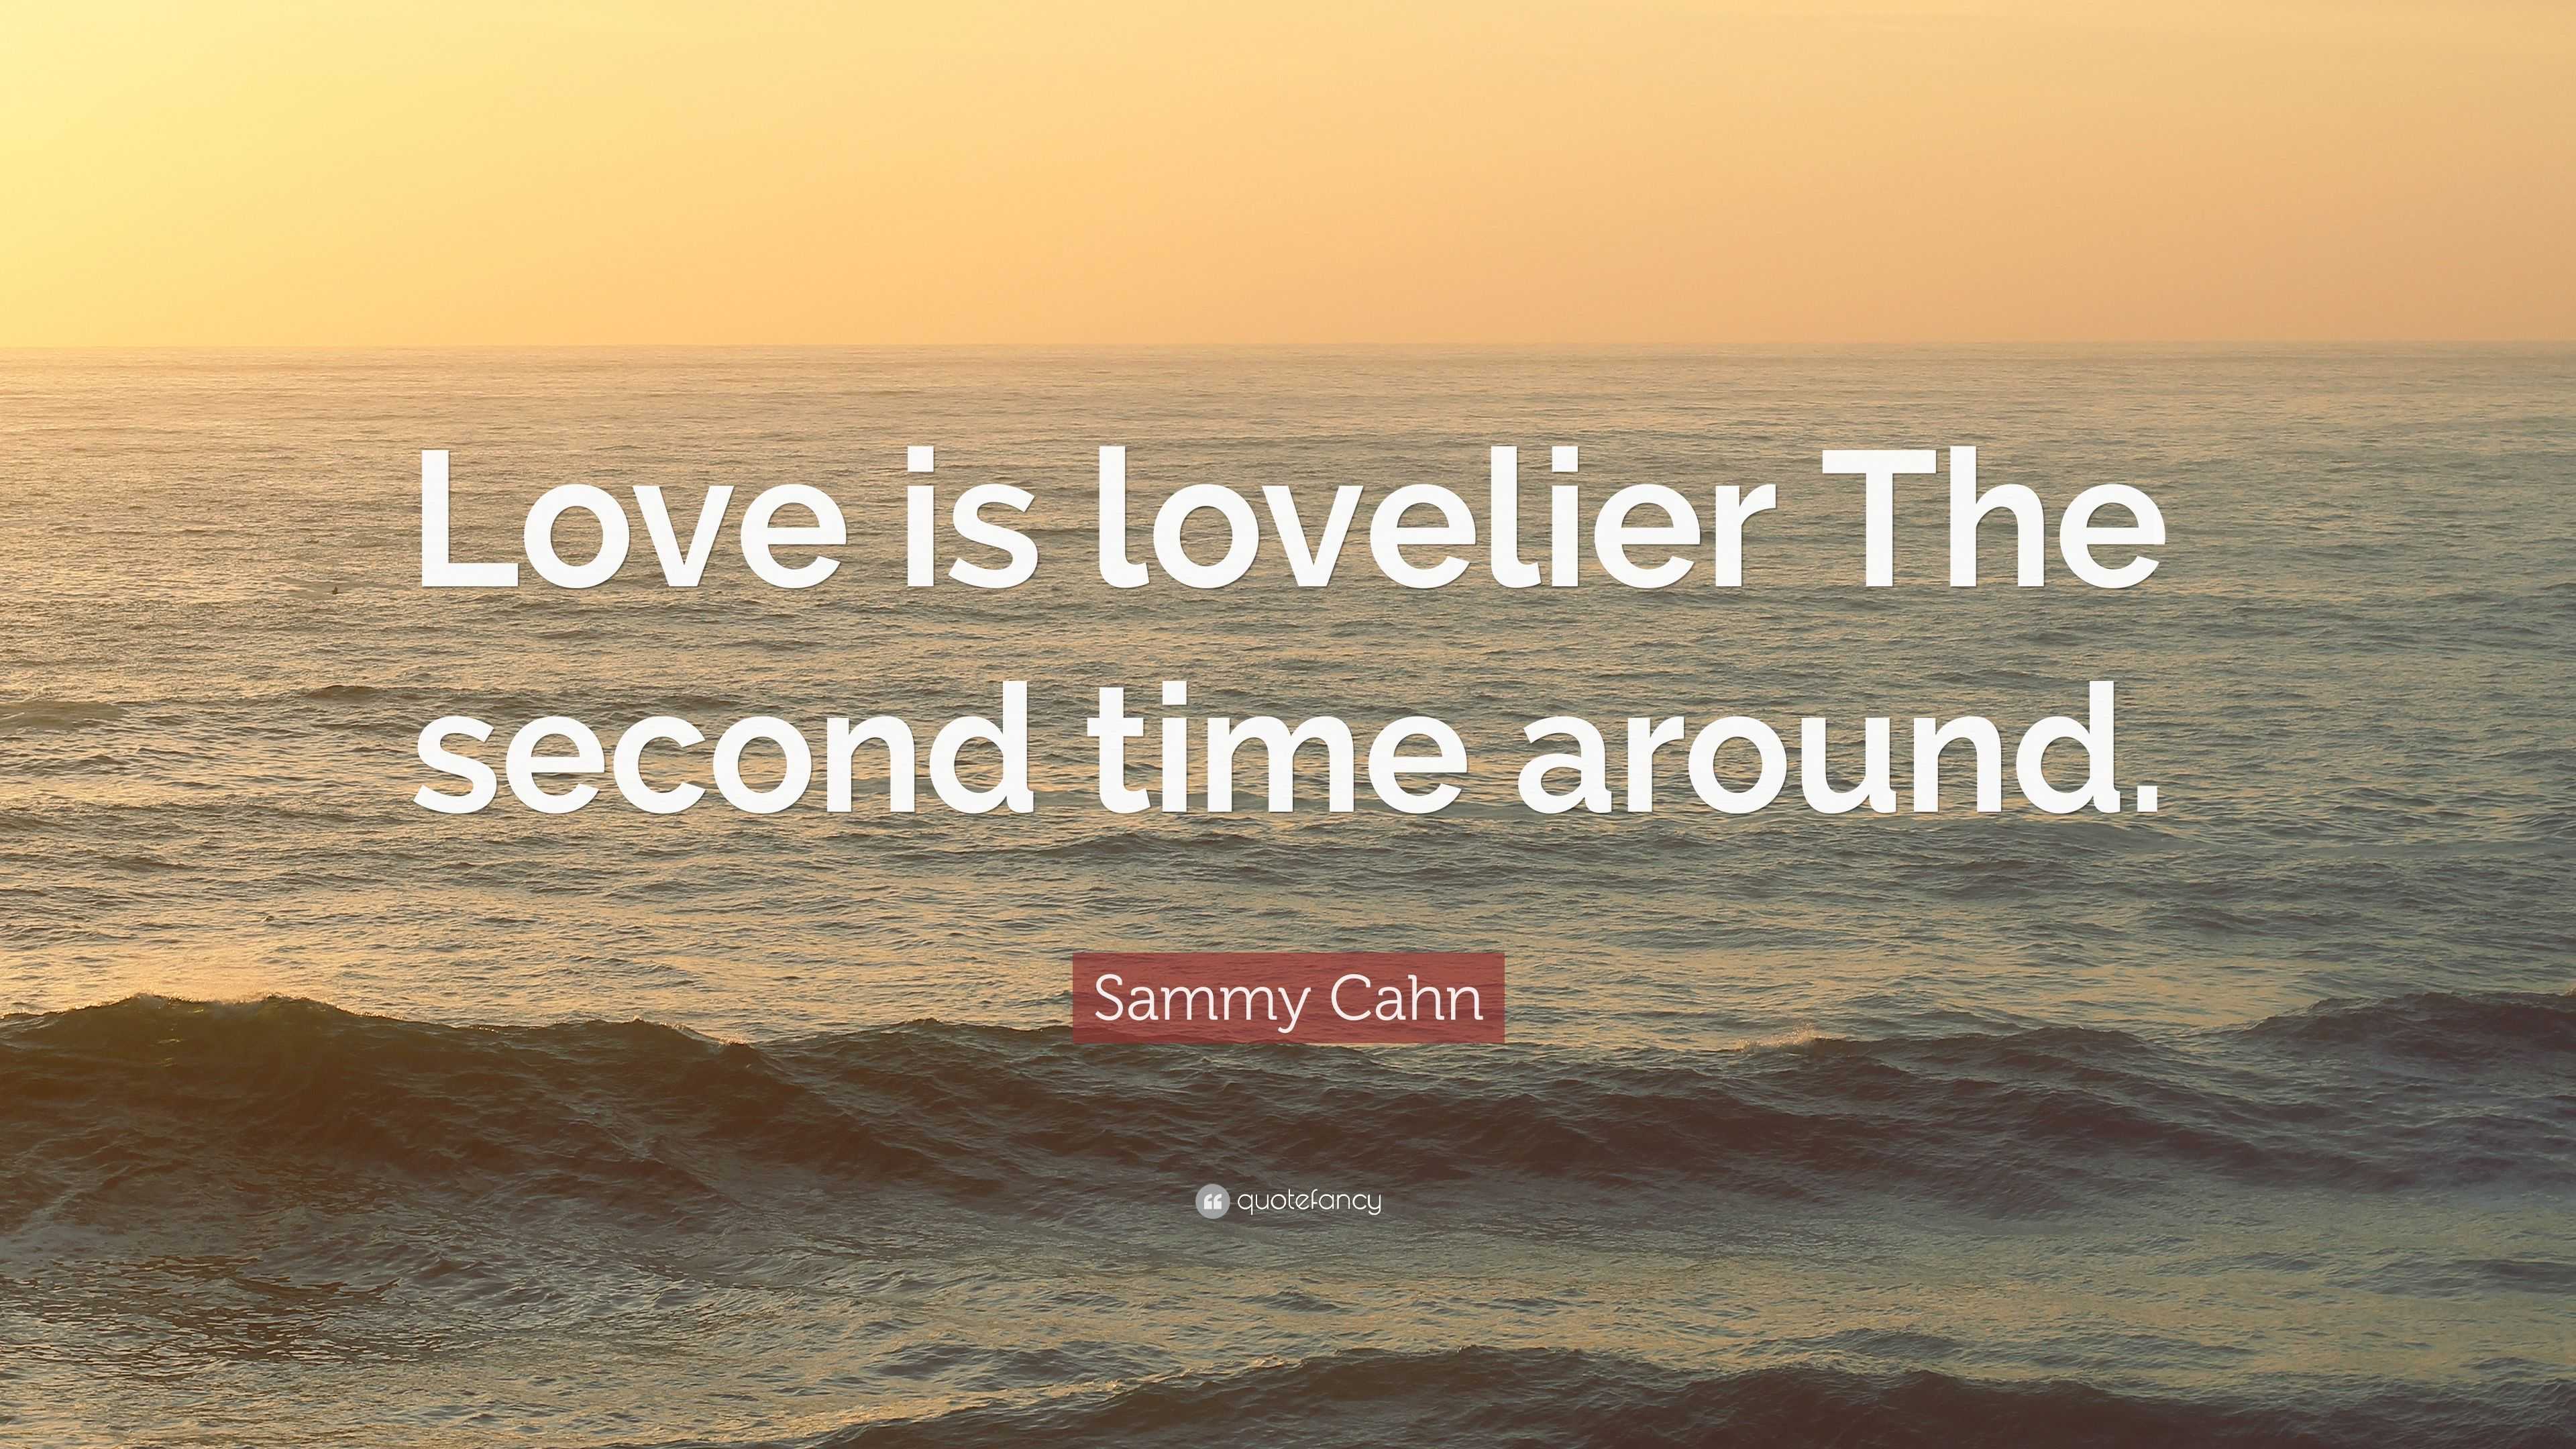 Fresh Love is Lovelier the Second Time Around Quotes | Thousands of